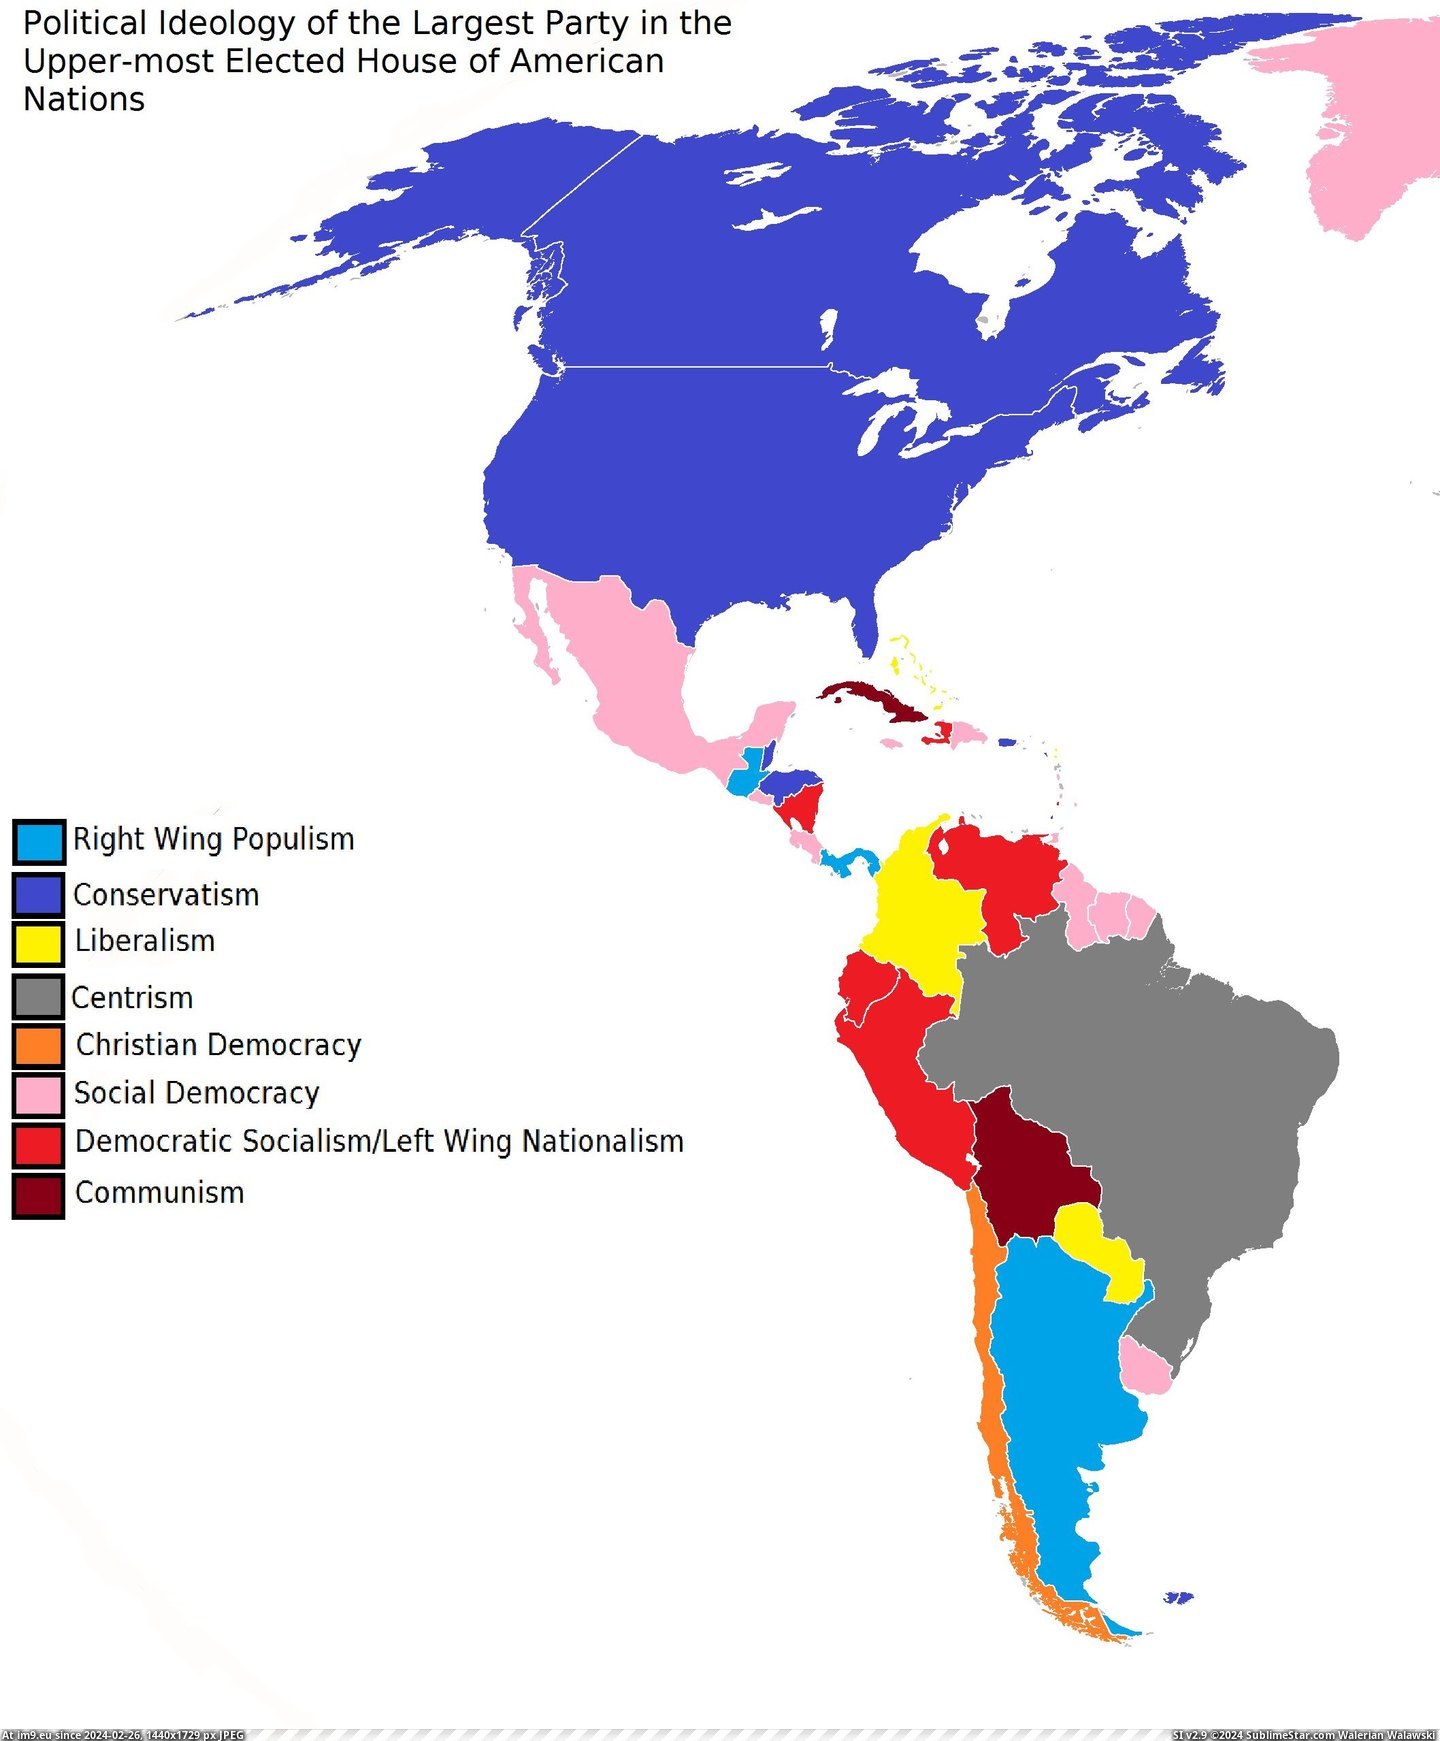 #House #Party #American #Elected #Ideology #Upper #Nations #Political [Mapporn]  Political Ideology of the Largst Party in the Upper-most Elected House of American Nations [2116x2552] Pic. (Image of album My r/MAPS favs))